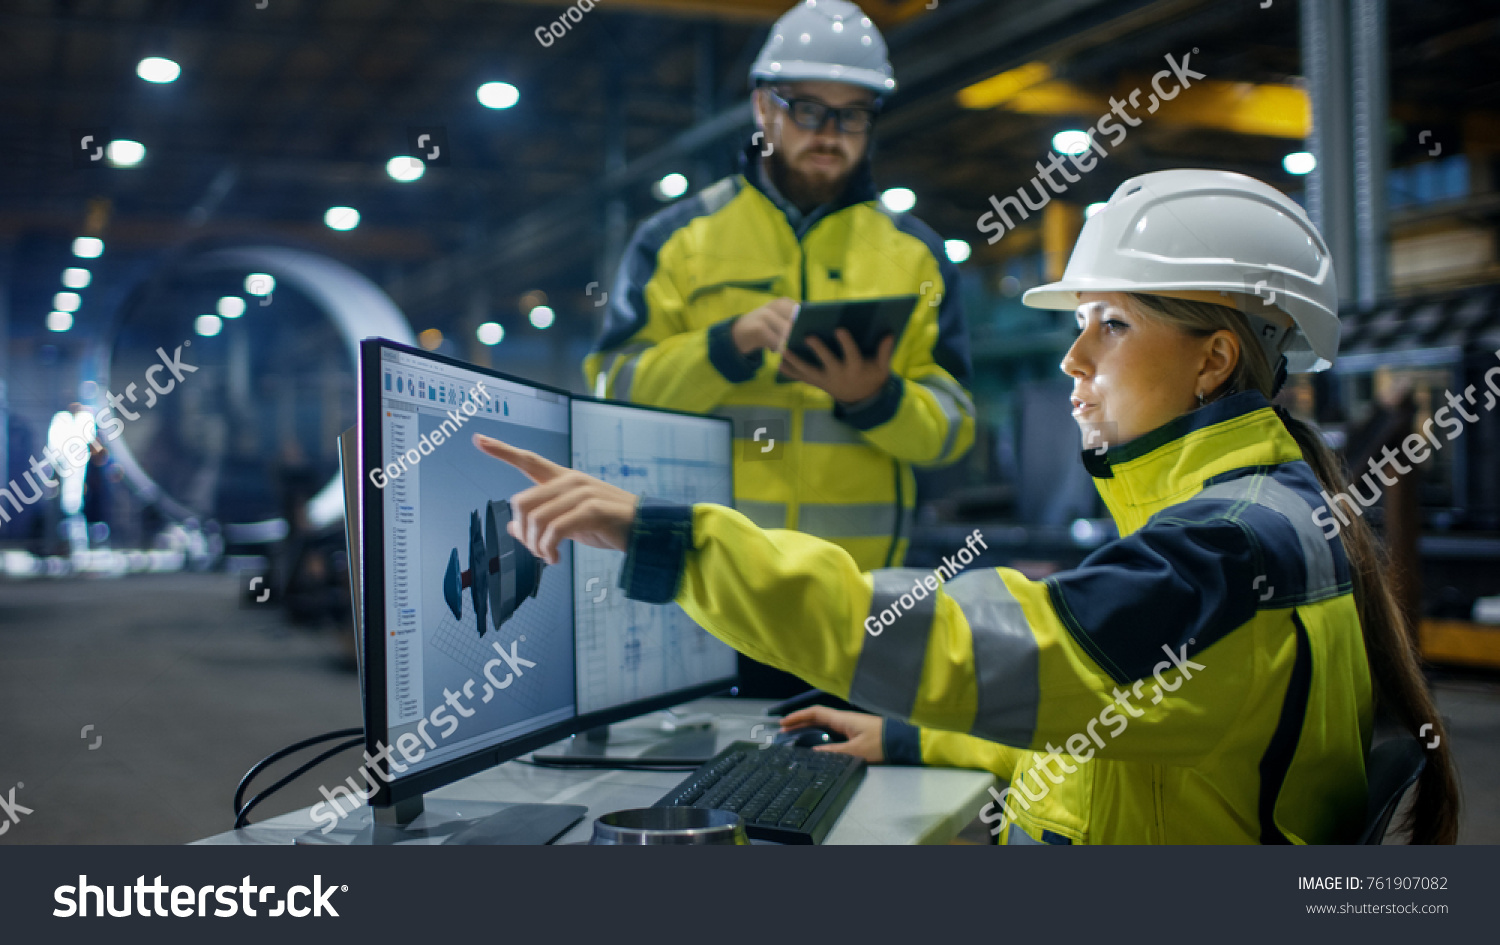 Inside the Heavy Industry, Factory Female Industrial Engineer Works on Personal Computer She Designs 3D Engine Model, Her Male Colleague Talks with Her and Uses Tablet Computer. Low Angle Shot. #761907082